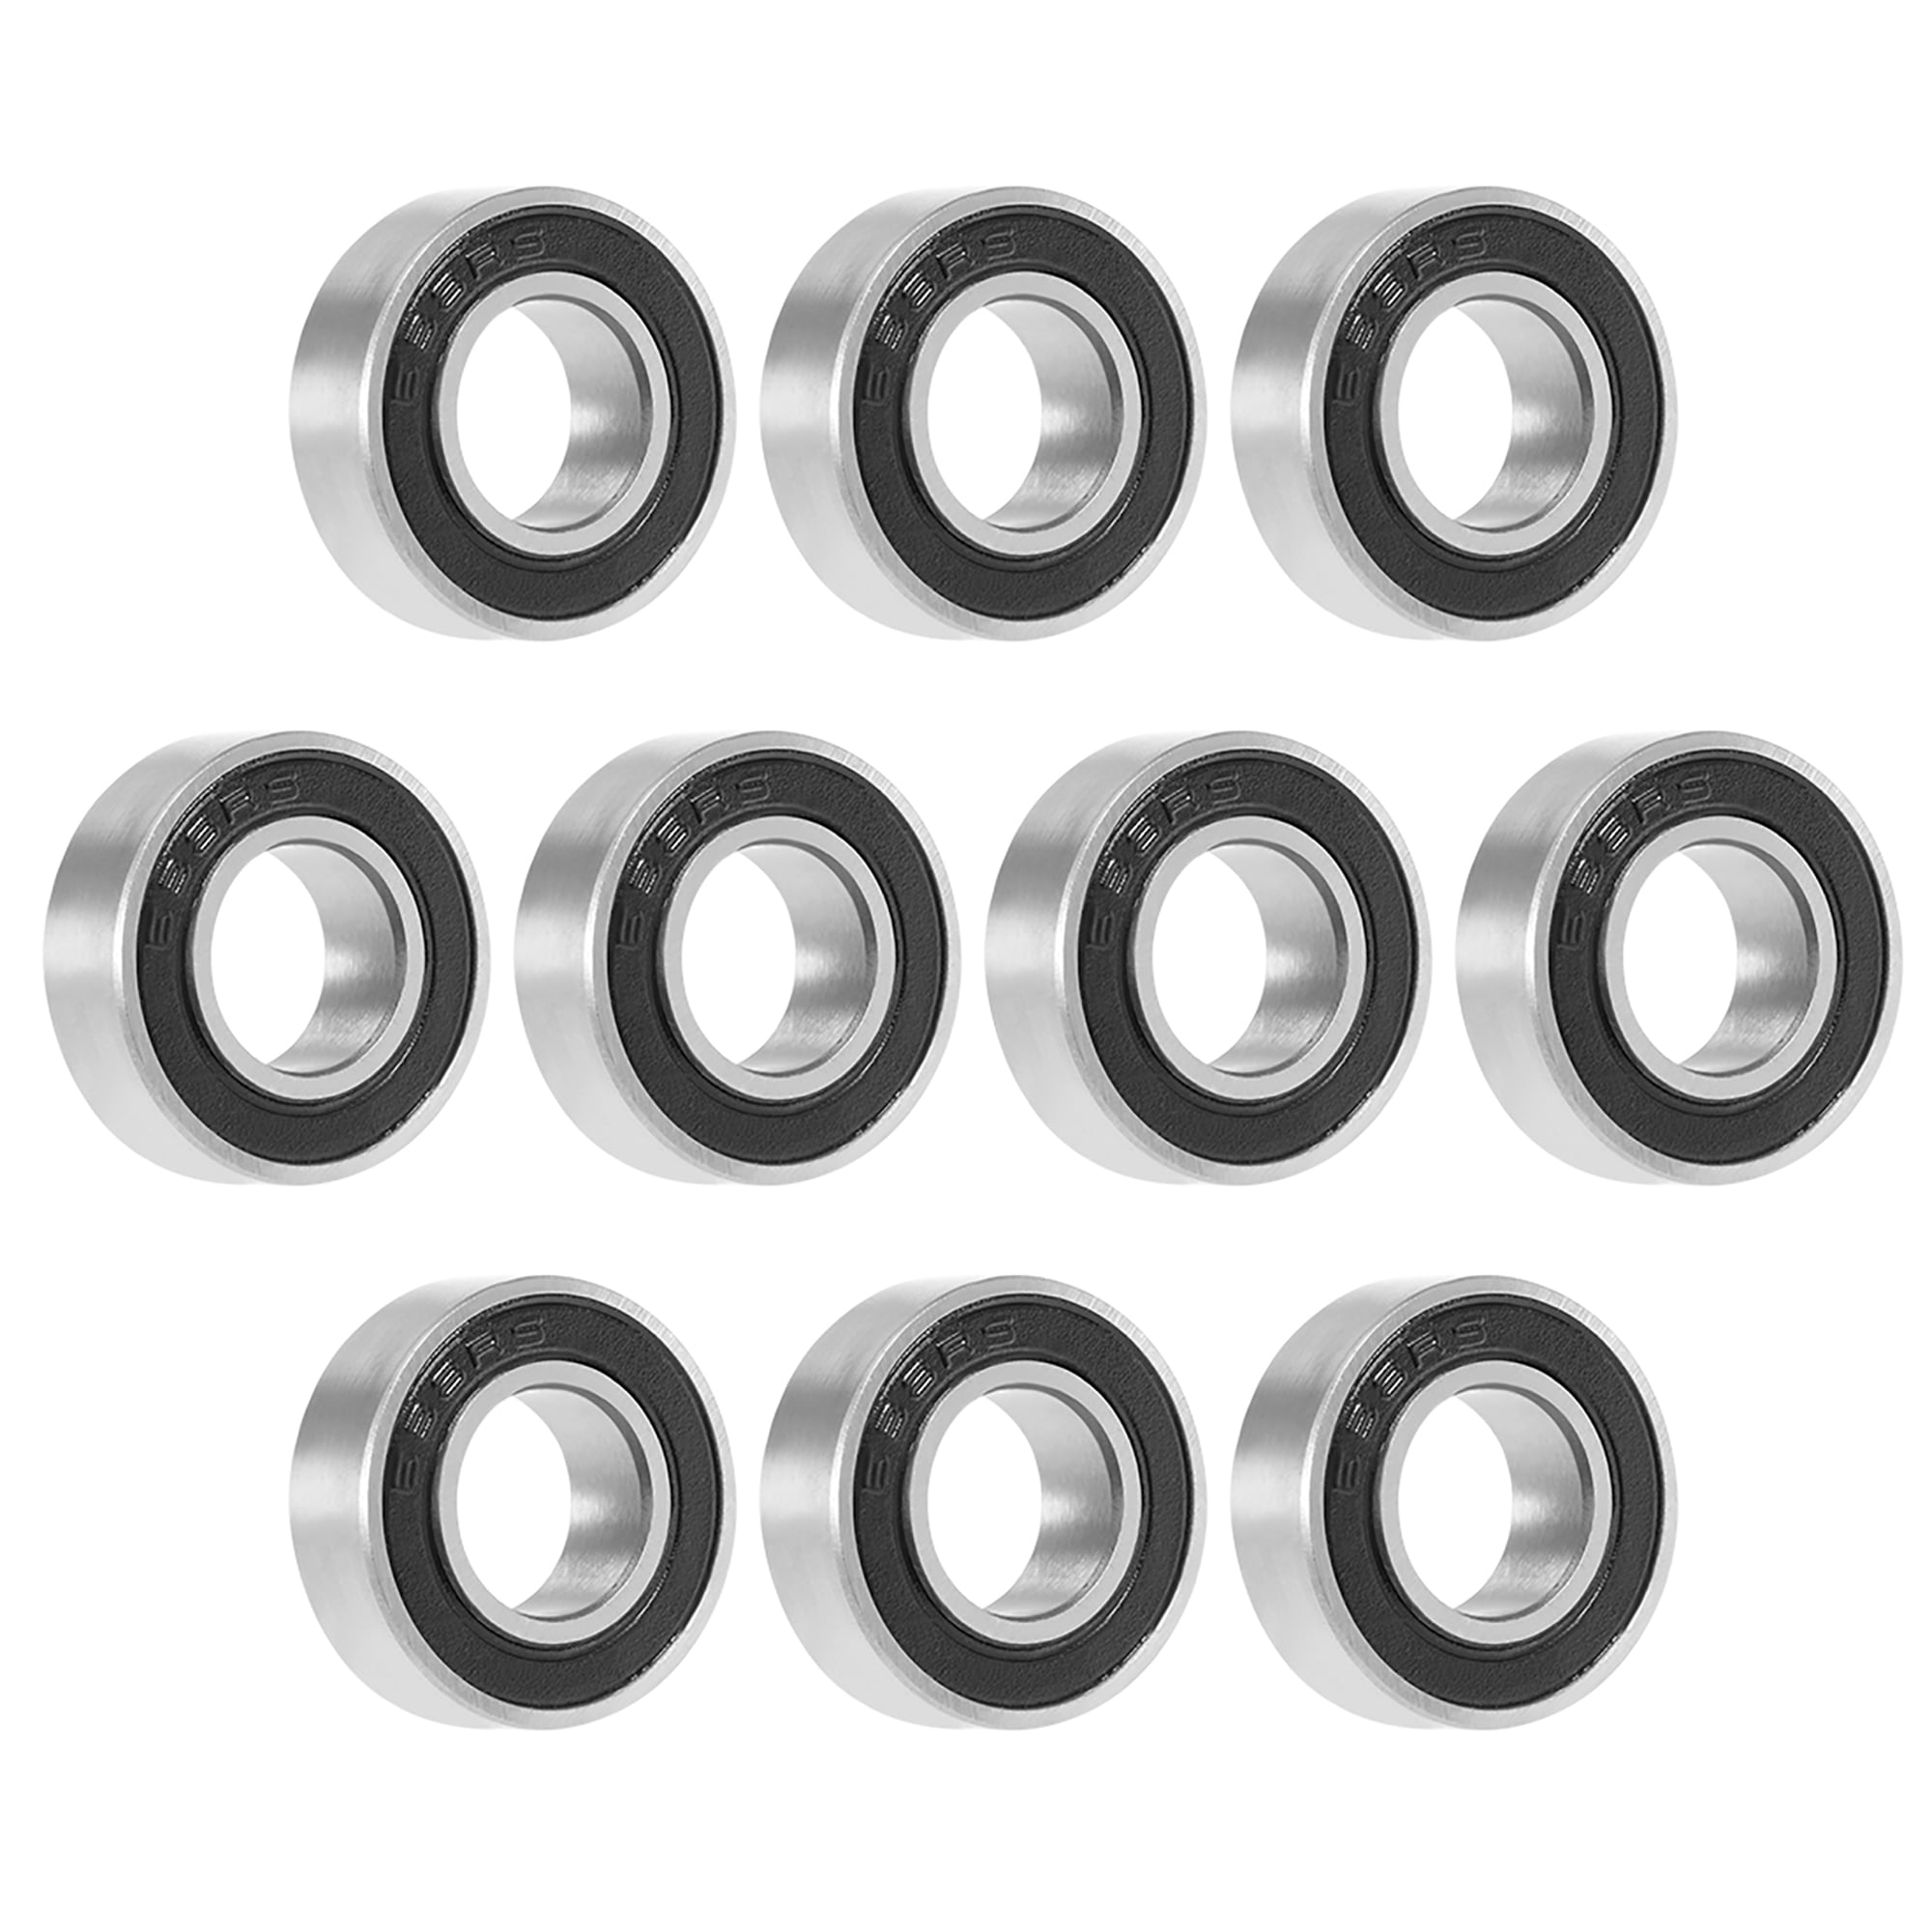 Deep Groove Ball Bearing 8x16x5mm Double Sealed ABEC-3 Bearings 5-Pack 